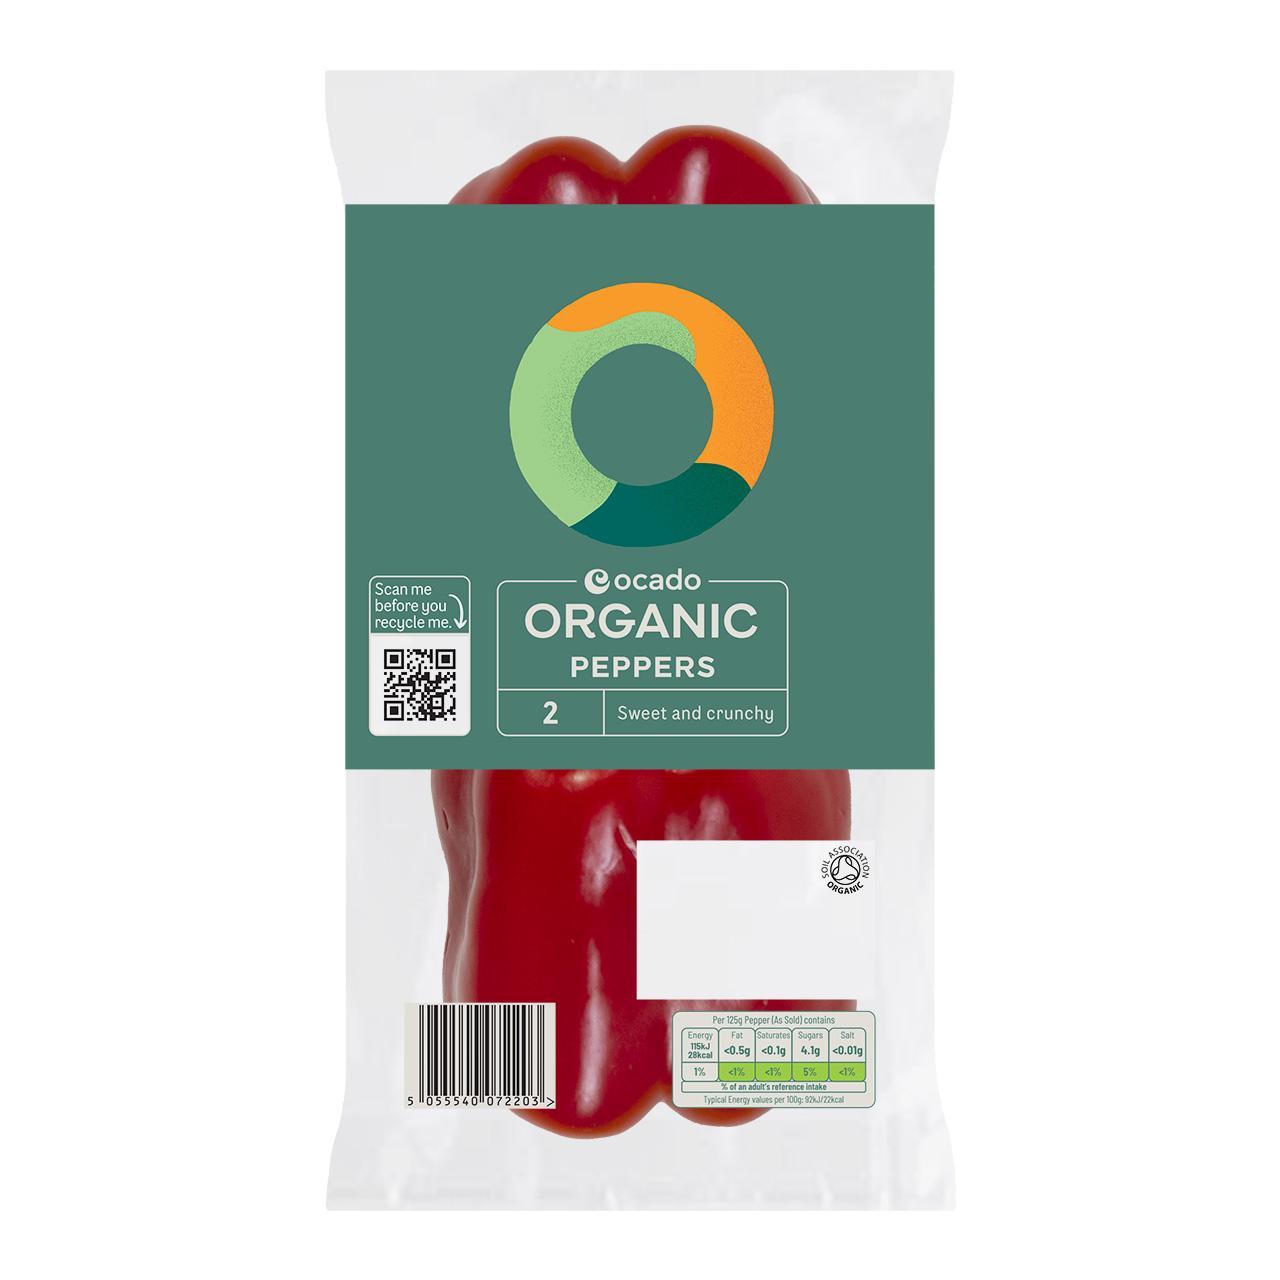 Ocado Organic Peppers (Colours may vary)